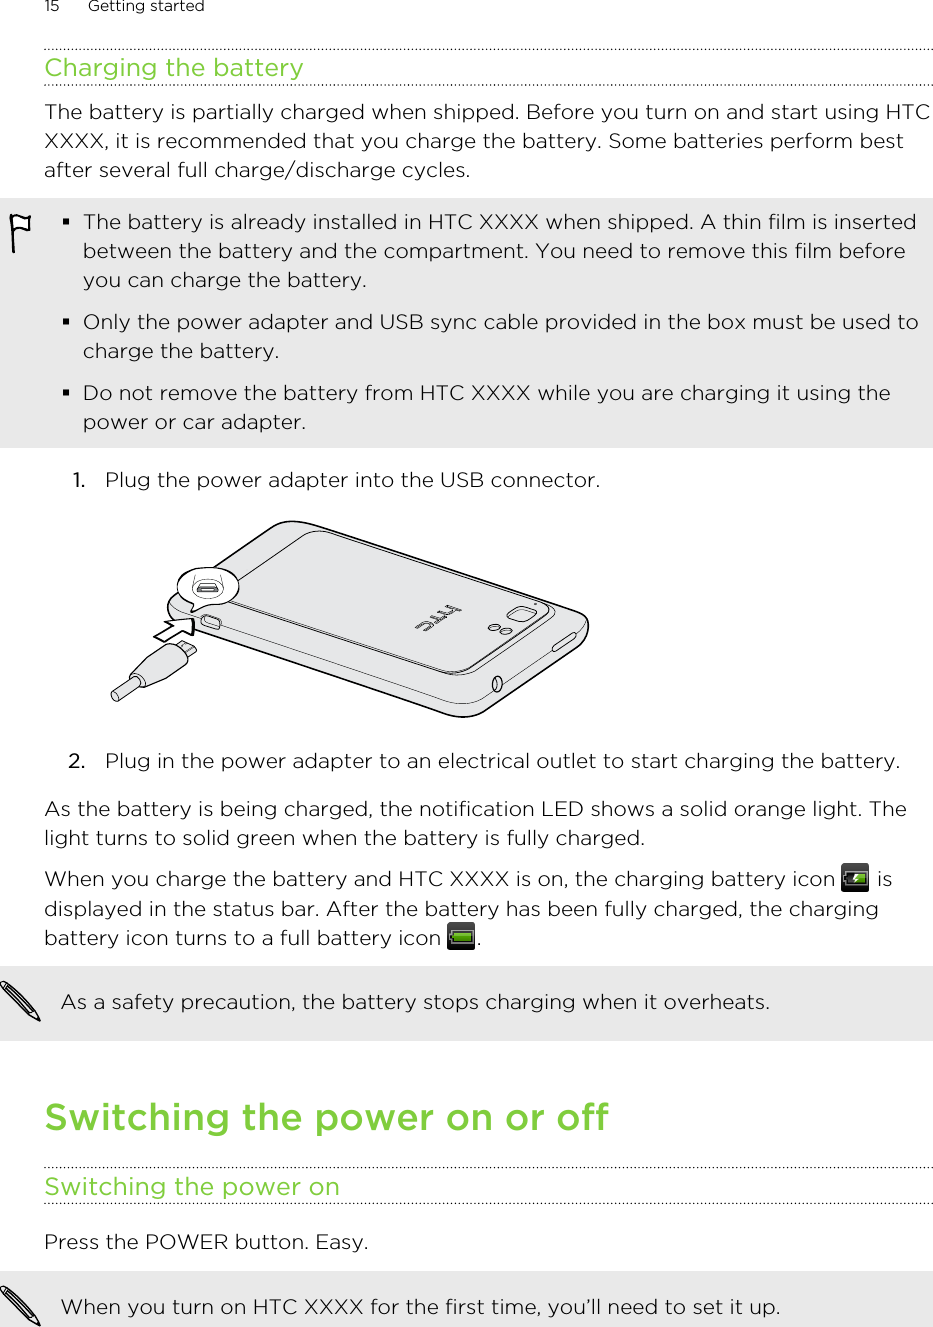 Charging the batteryThe battery is partially charged when shipped. Before you turn on and start using HTCXXXX, it is recommended that you charge the battery. Some batteries perform bestafter several full charge/discharge cycles.§The battery is already installed in HTC XXXX when shipped. A thin film is insertedbetween the battery and the compartment. You need to remove this film beforeyou can charge the battery.§Only the power adapter and USB sync cable provided in the box must be used tocharge the battery.§Do not remove the battery from HTC XXXX while you are charging it using thepower or car adapter.1. Plug the power adapter into the USB connector. 2. Plug in the power adapter to an electrical outlet to start charging the battery.As the battery is being charged, the notification LED shows a solid orange light. Thelight turns to solid green when the battery is fully charged.When you charge the battery and HTC XXXX is on, the charging battery icon   isdisplayed in the status bar. After the battery has been fully charged, the chargingbattery icon turns to a full battery icon  .As a safety precaution, the battery stops charging when it overheats.Switching the power on or offSwitching the power onPress the POWER button. Easy. When you turn on HTC XXXX for the first time, you’ll need to set it up.15 Getting started